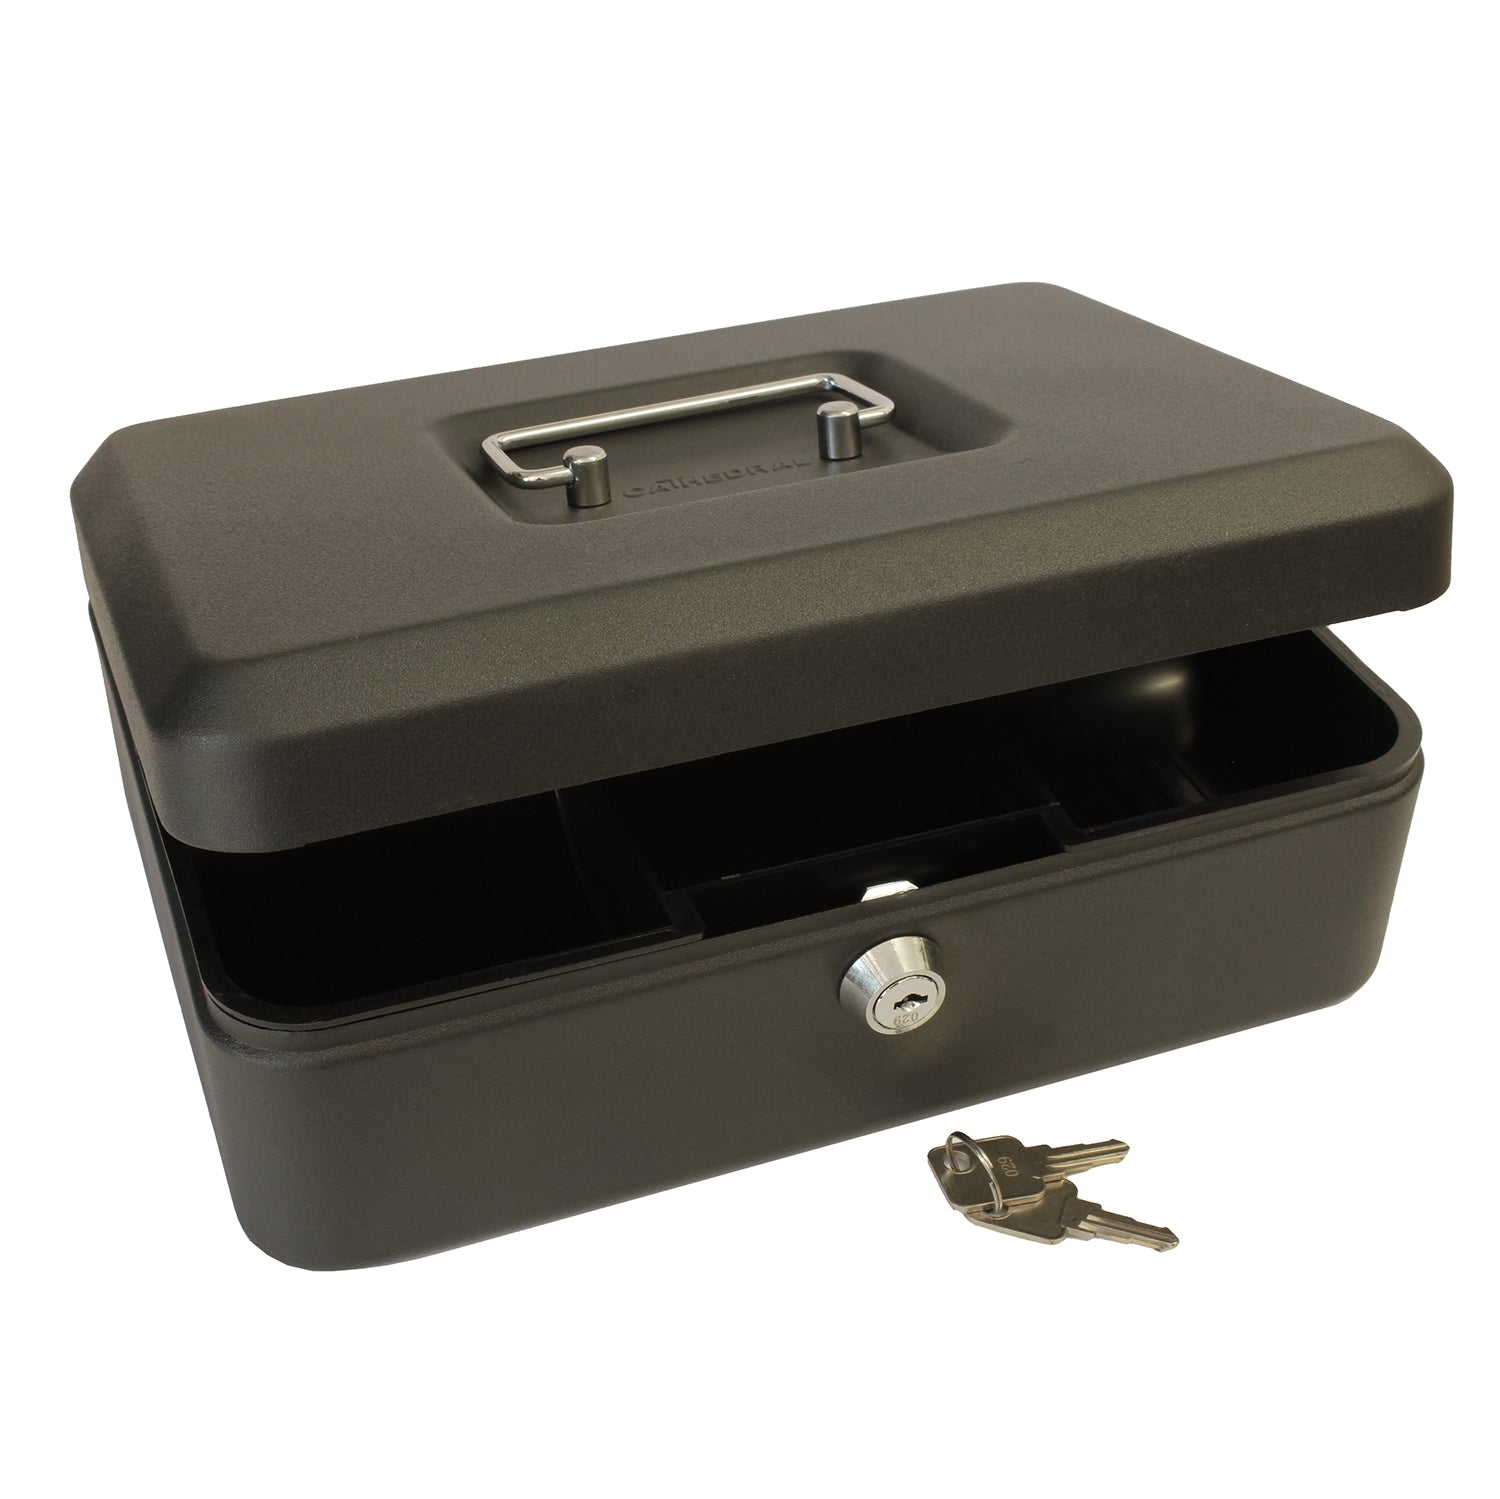 A partially open matte black 10-inch key lockable cash box. The box features a sturdy metal handle and a secure lock at the front for safekeeping of cash and coins. A set of 2 keys on a ring is shown sitting in front of the cash box.